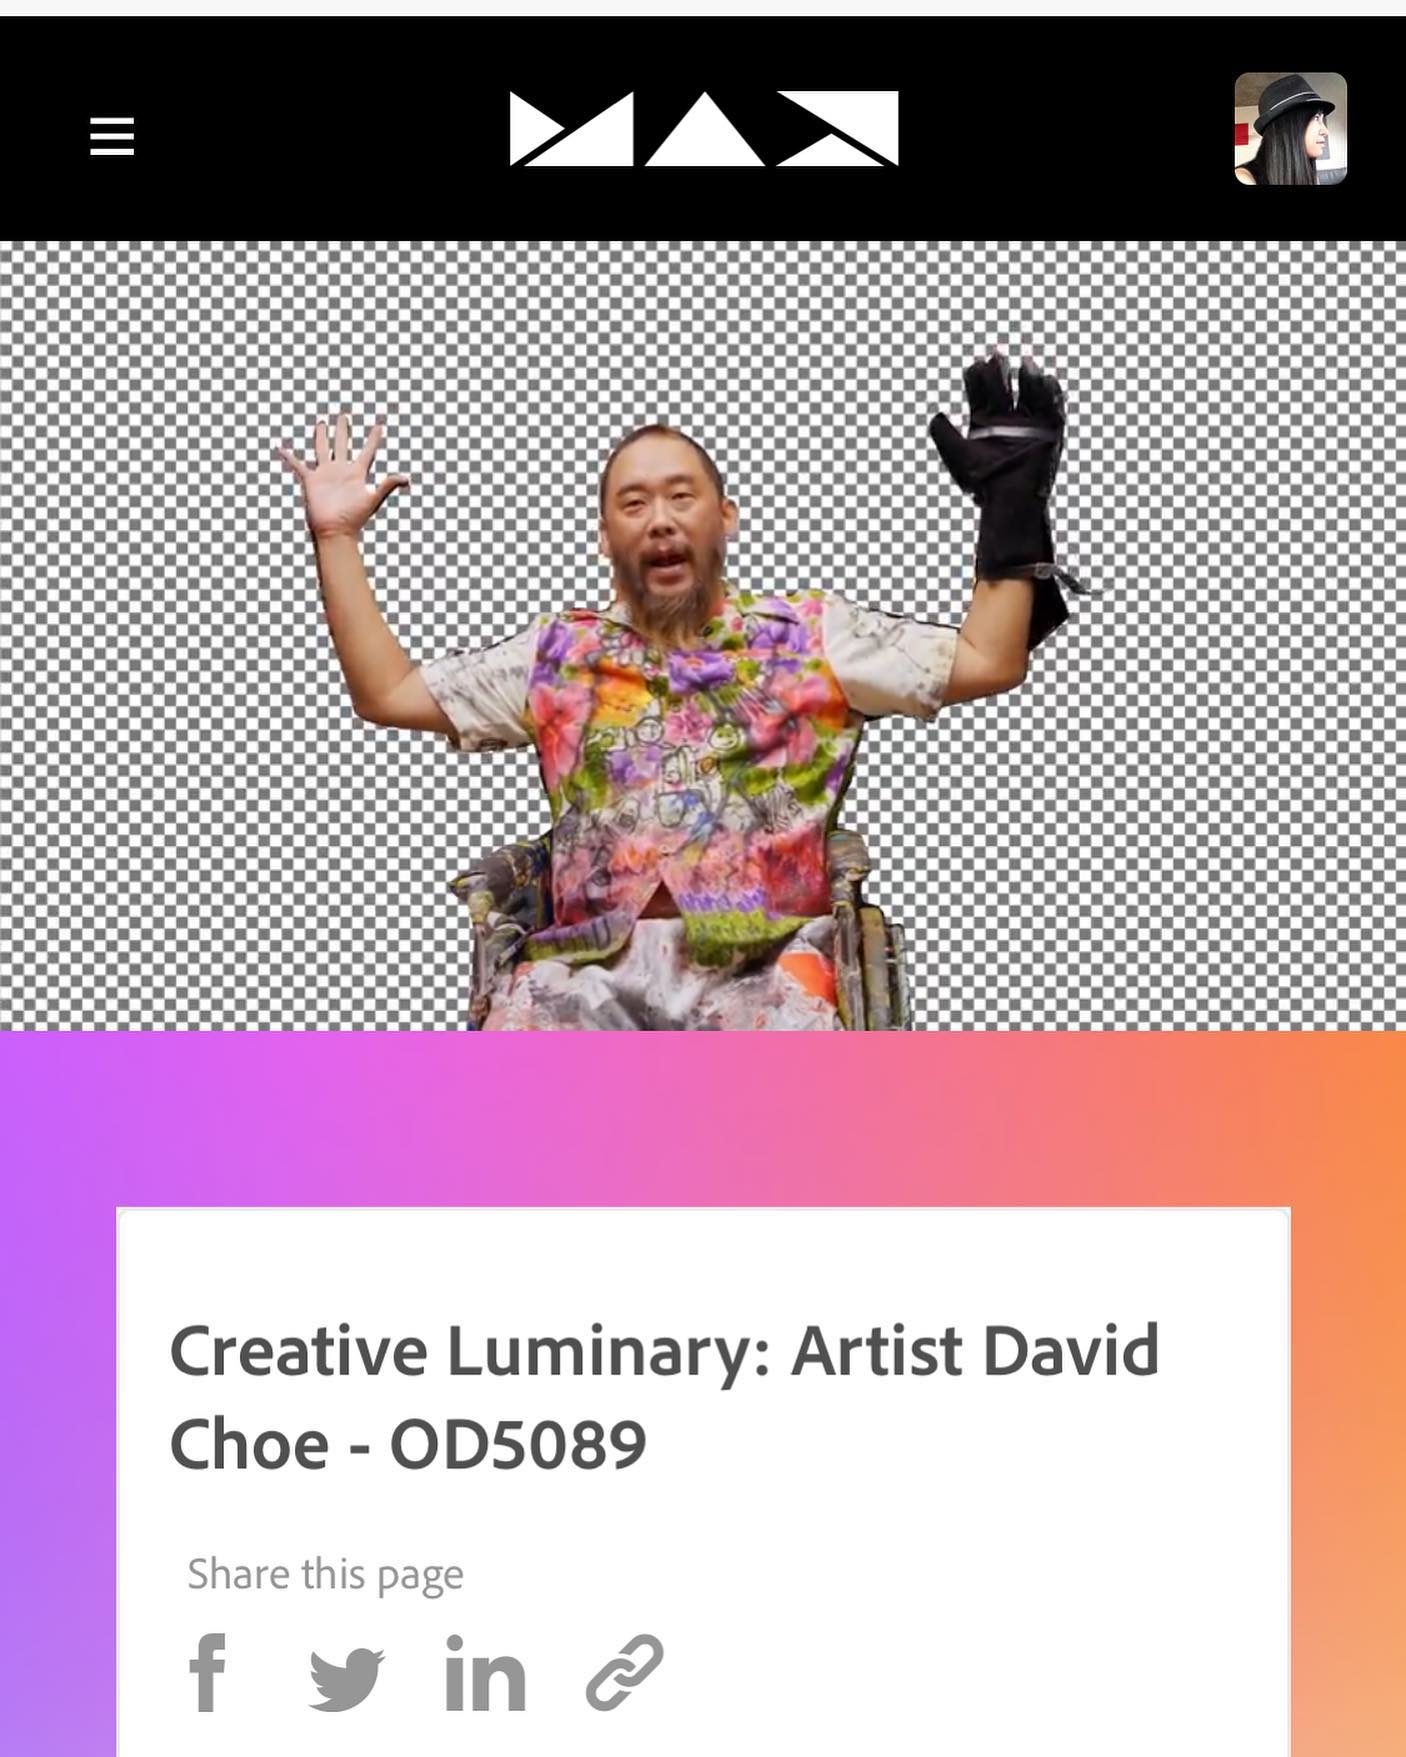 Let’s just say it made my day to watch @davidchoe do his thing at on the website that our team designed! @photoshop @adobe @adobecreativecloud